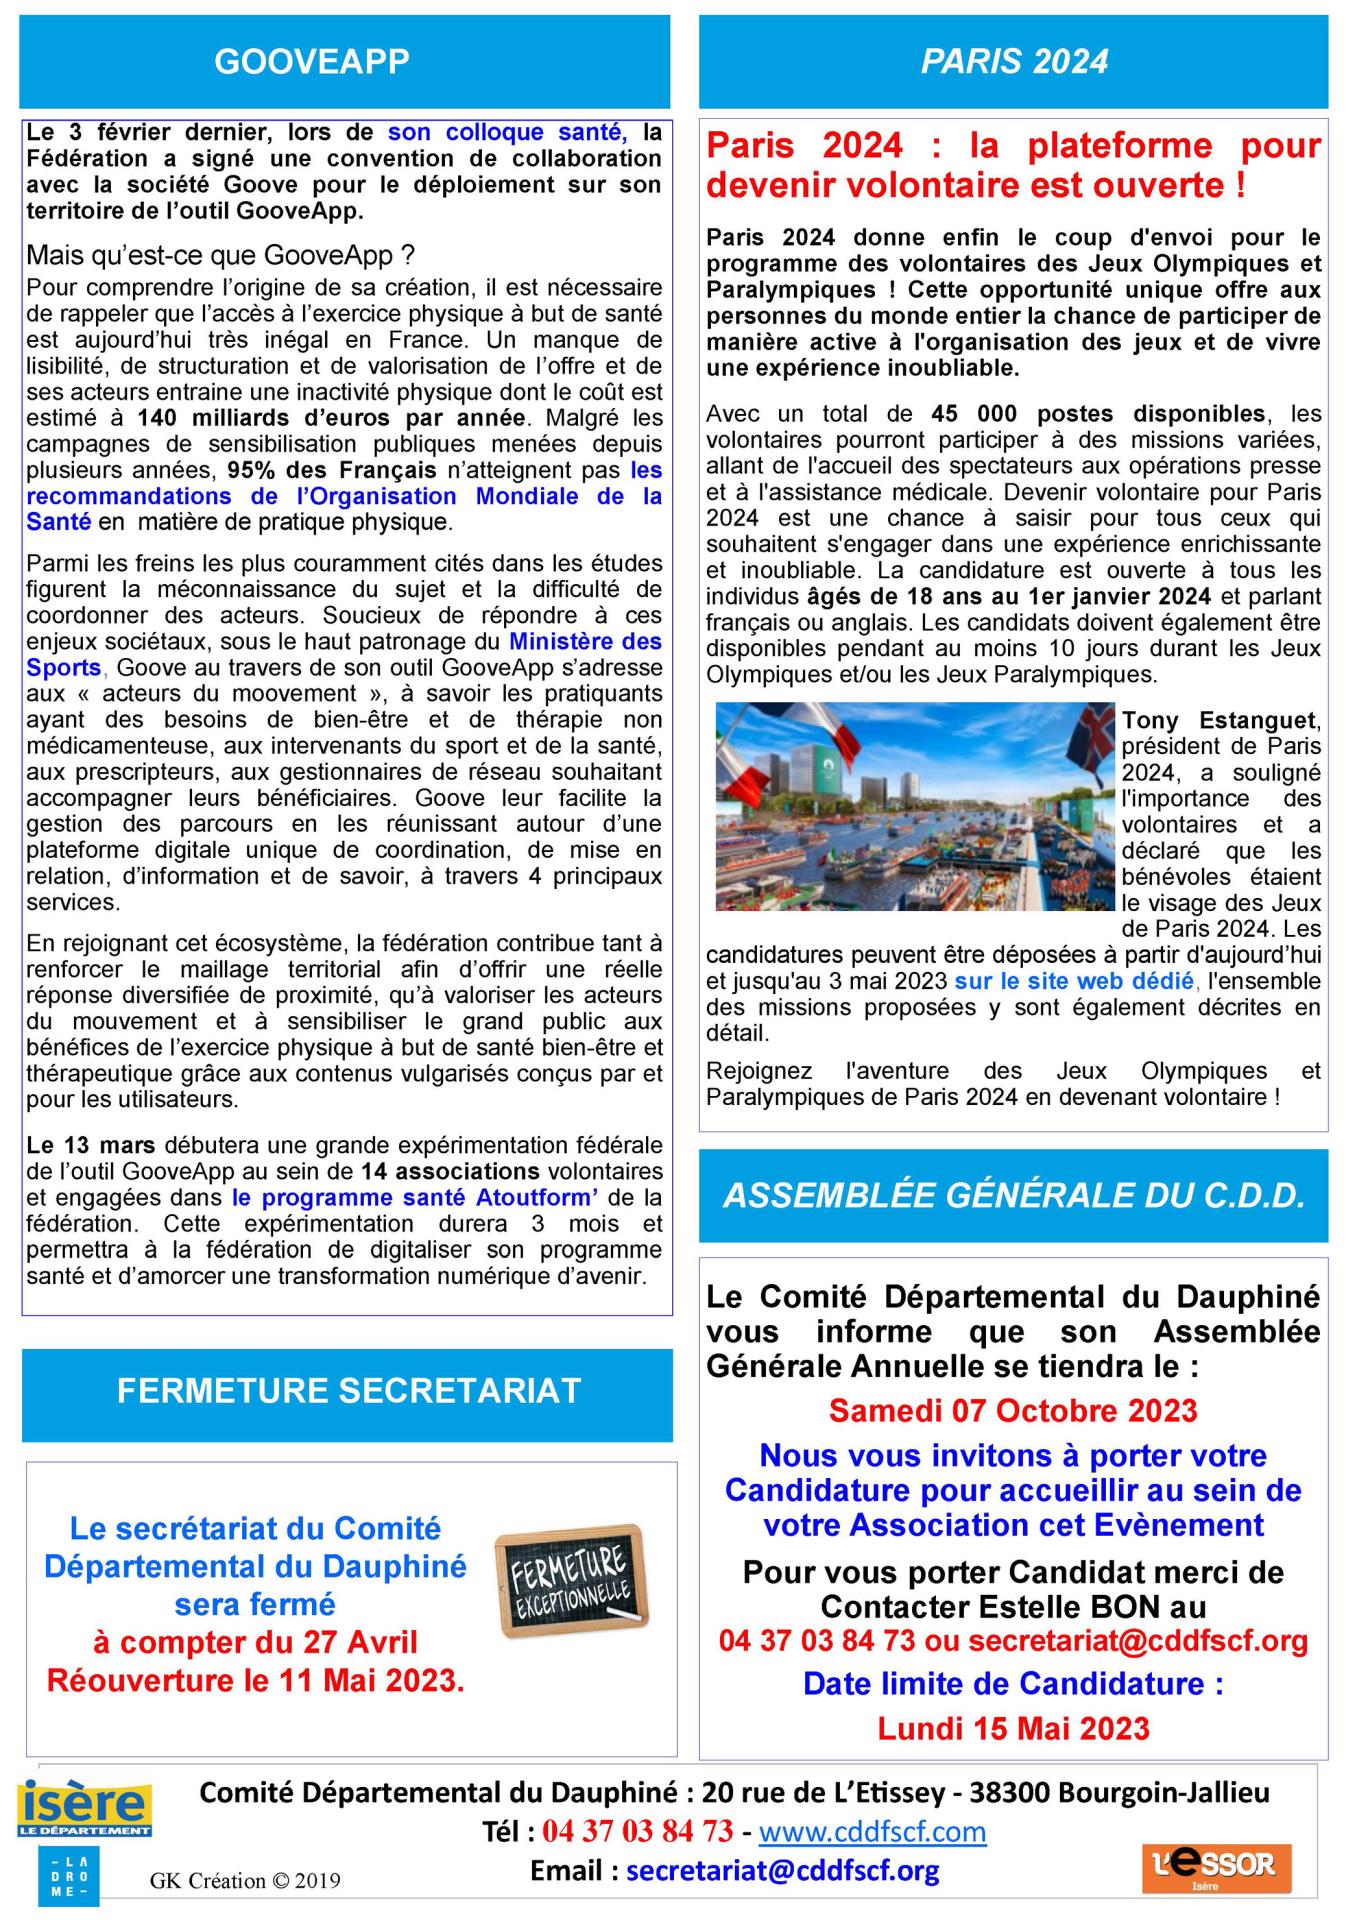 Newsletter n72 04 2023 page 2